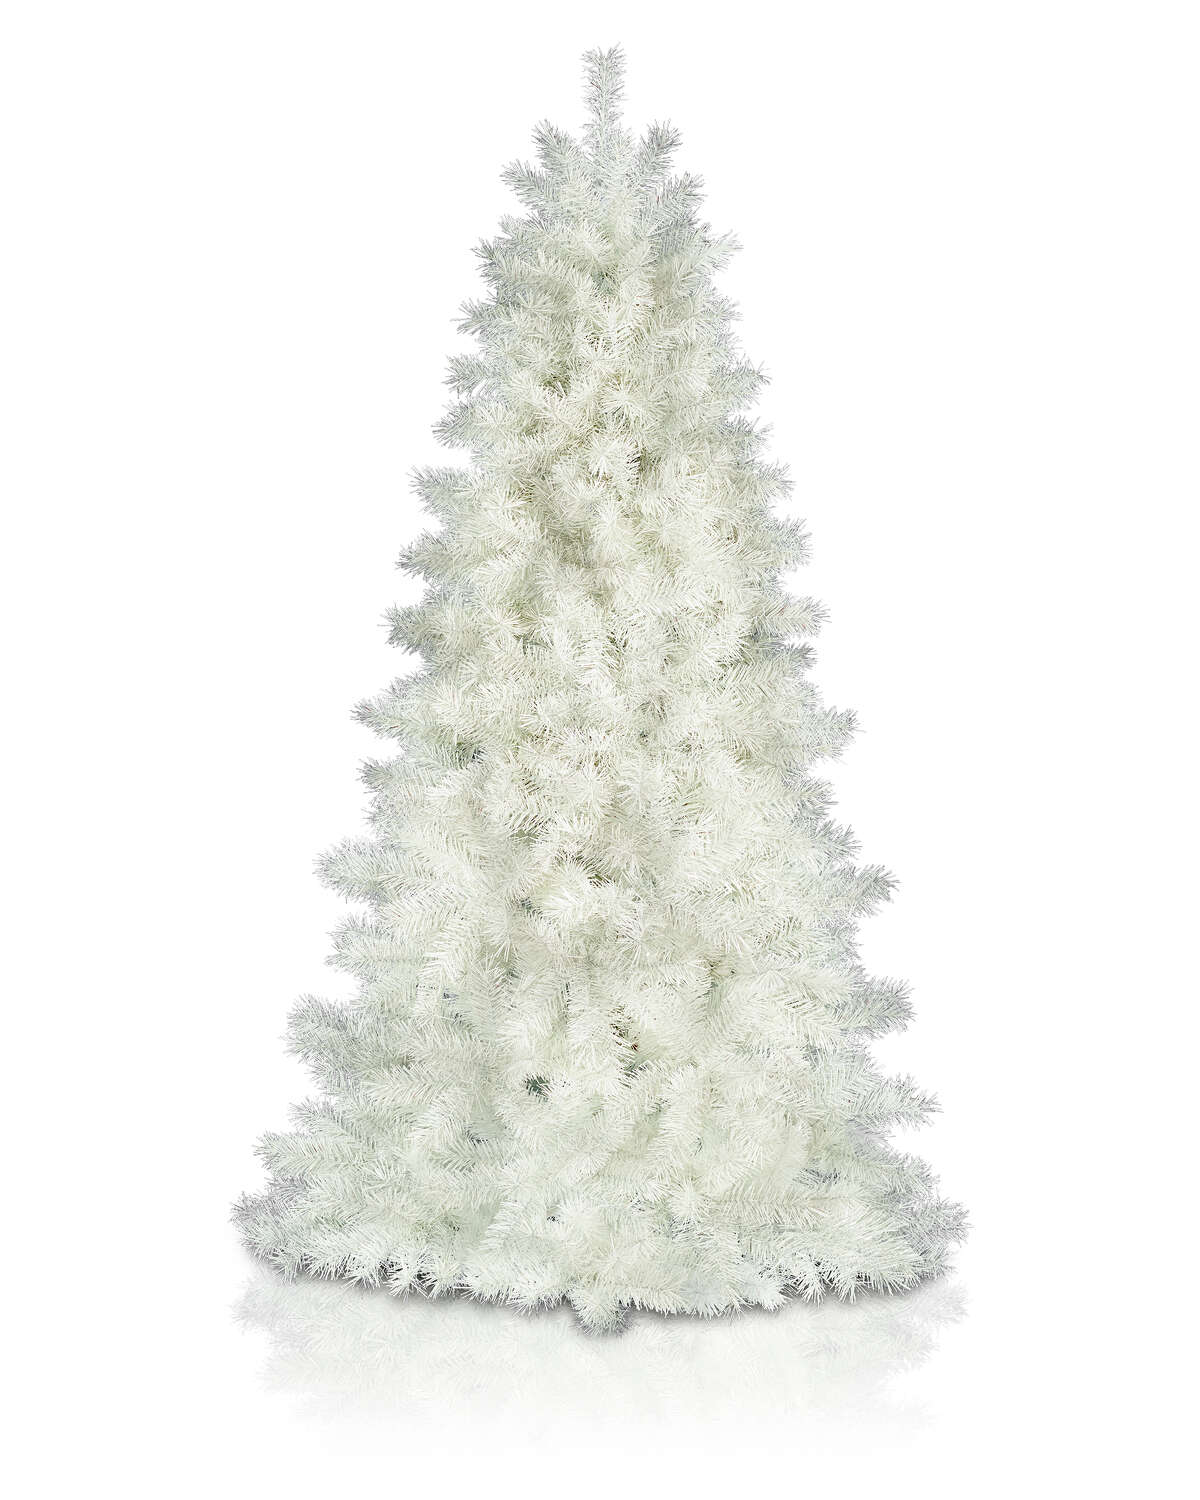 For a snowed-in look, white Christmas trees are a top trend